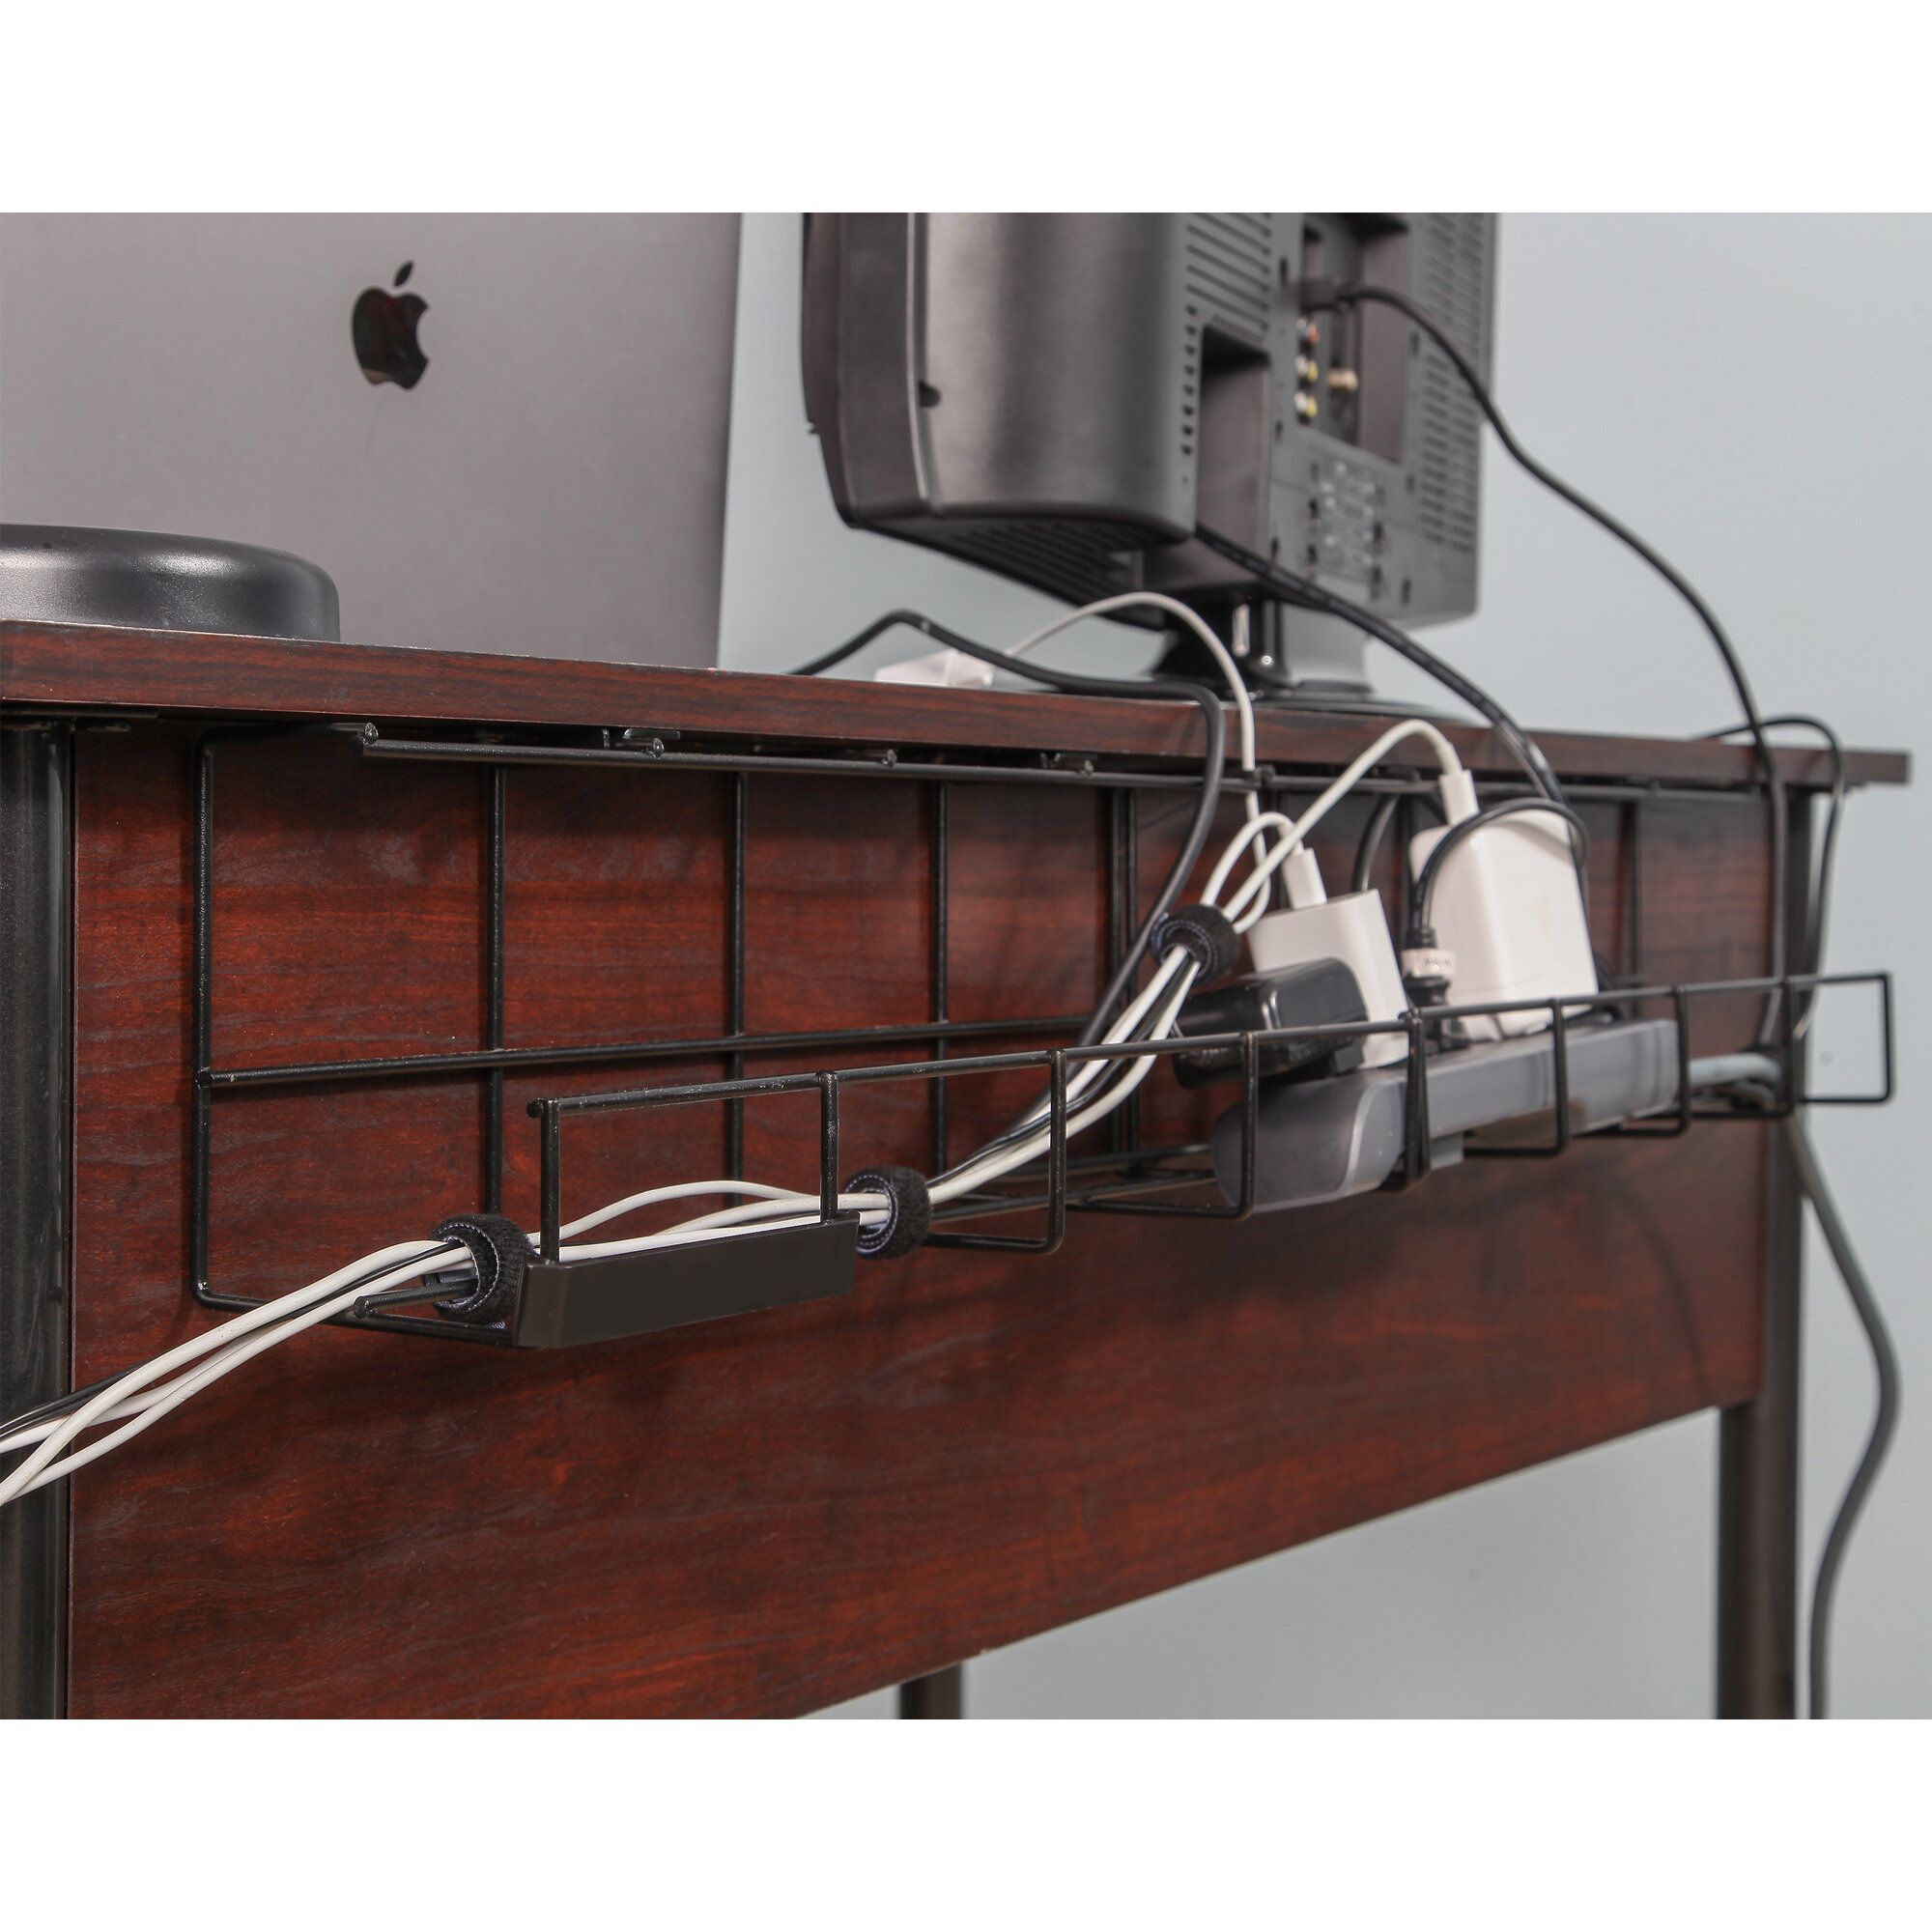 Cable Management Rack, Harness Organizer, Wire Organizer